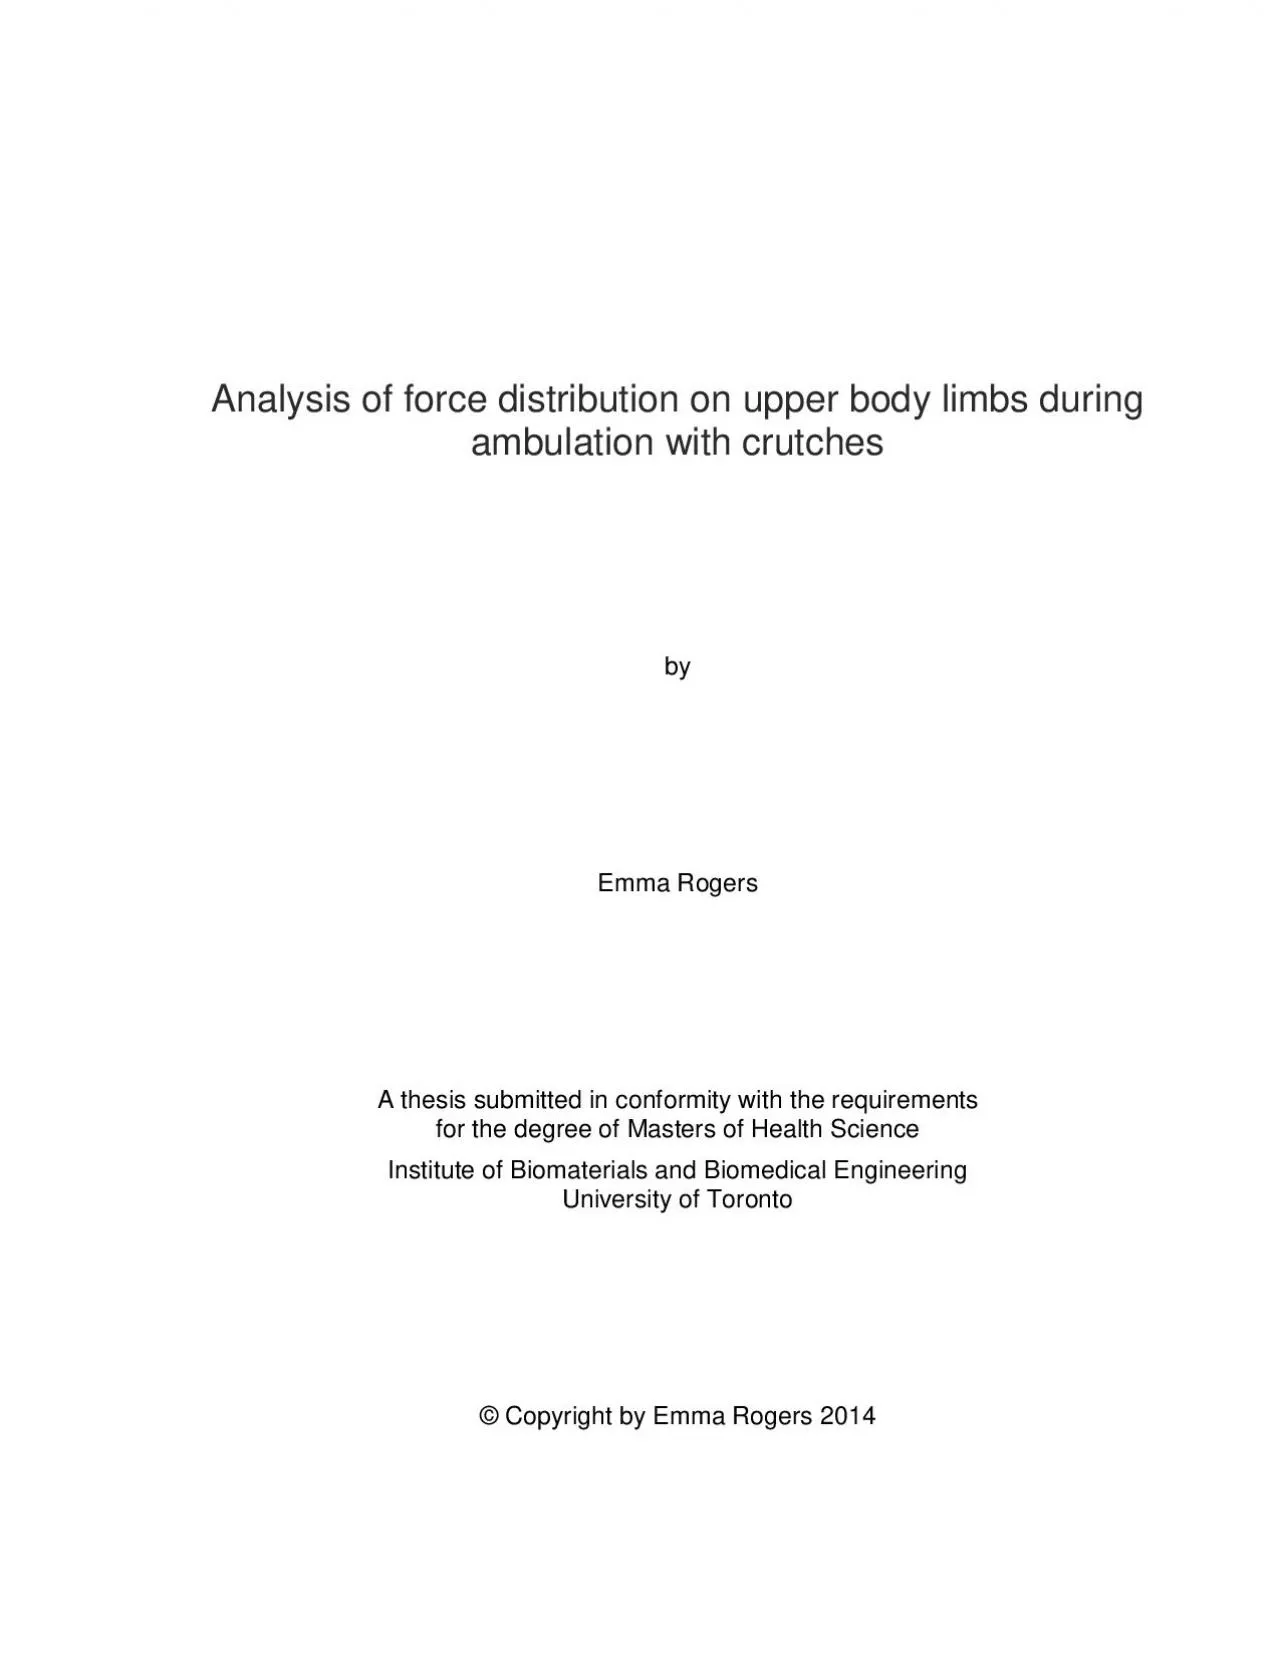 Analysis of force distribution on upper body limbs during